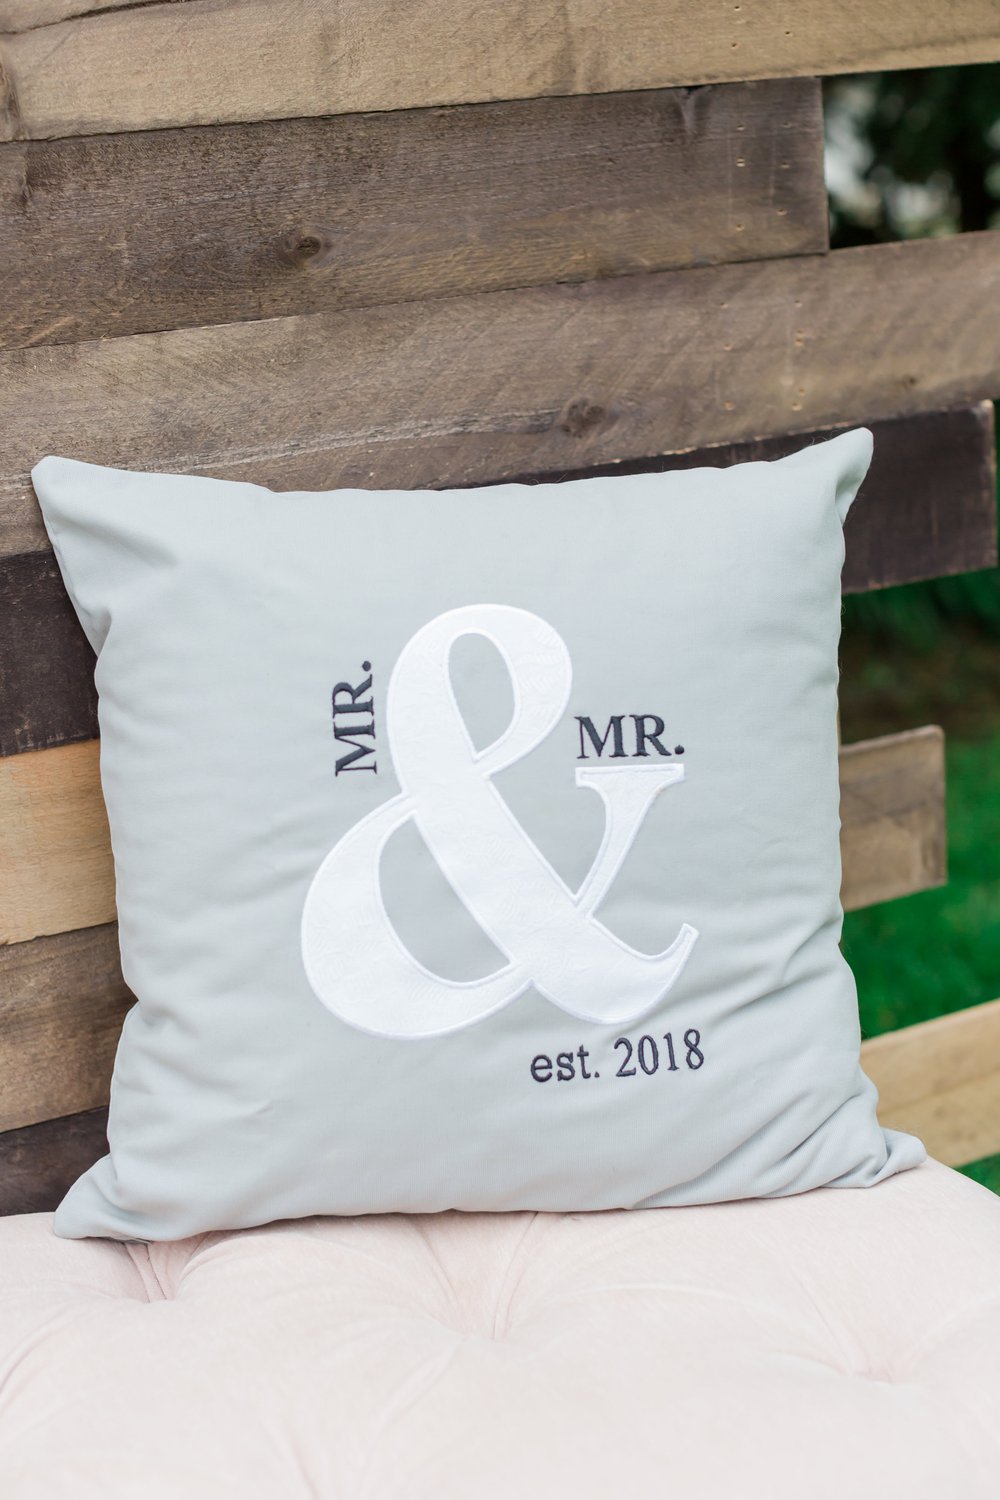  A pillow with embroidery that reads “Mr. &amp; Mr. est. 2018” 